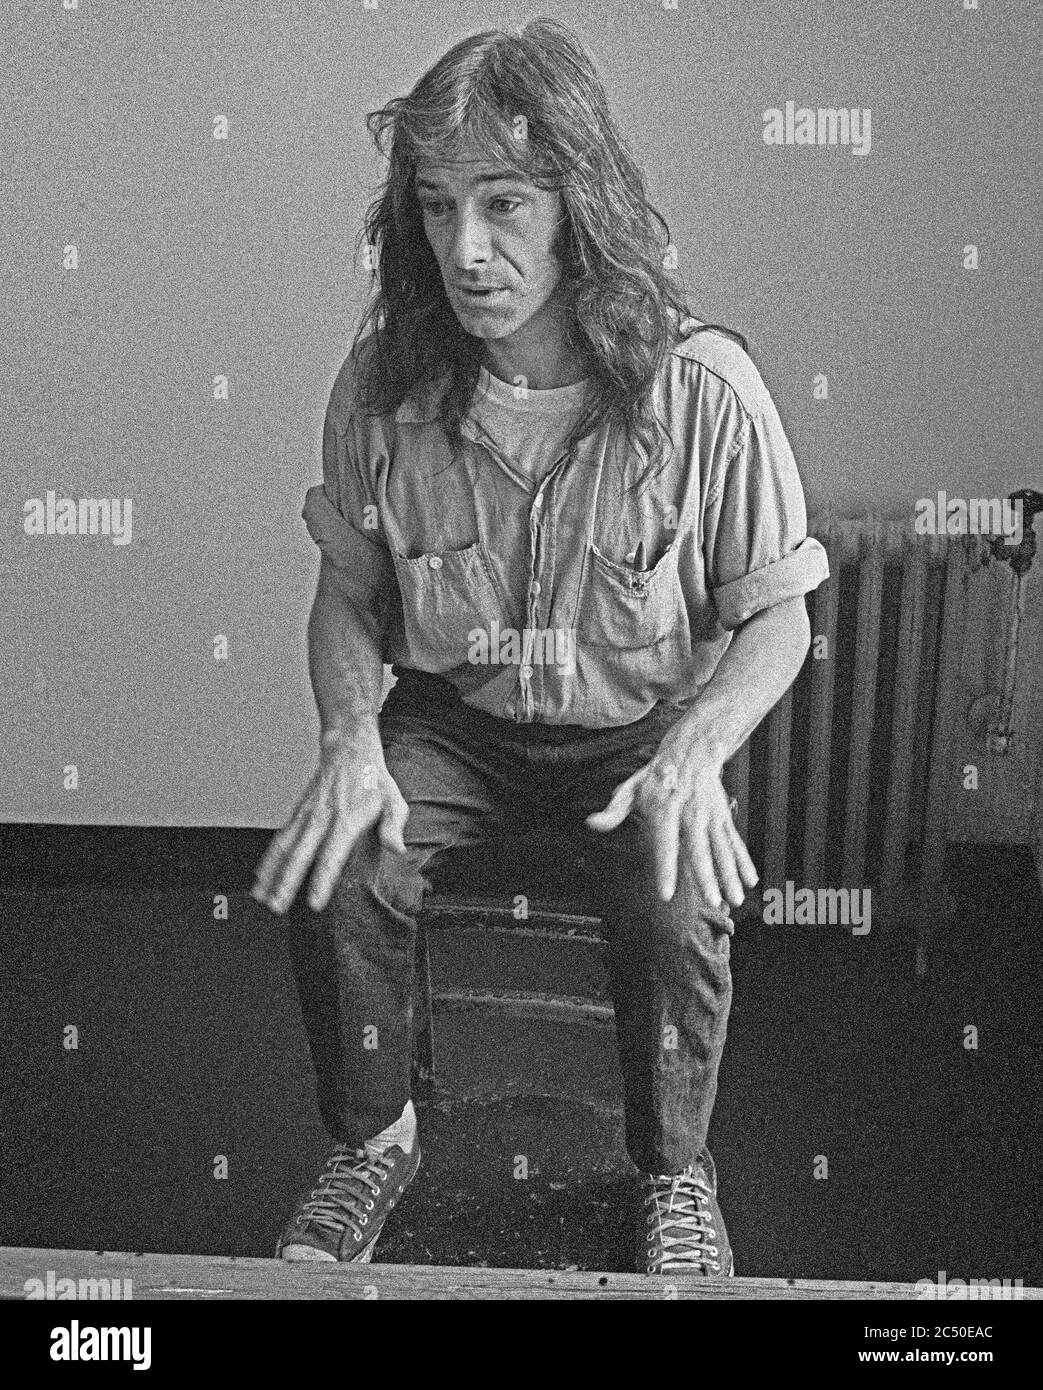 Dennis Robert Peron, a San Francisco activist, in jail in the late 70s Stock Photo